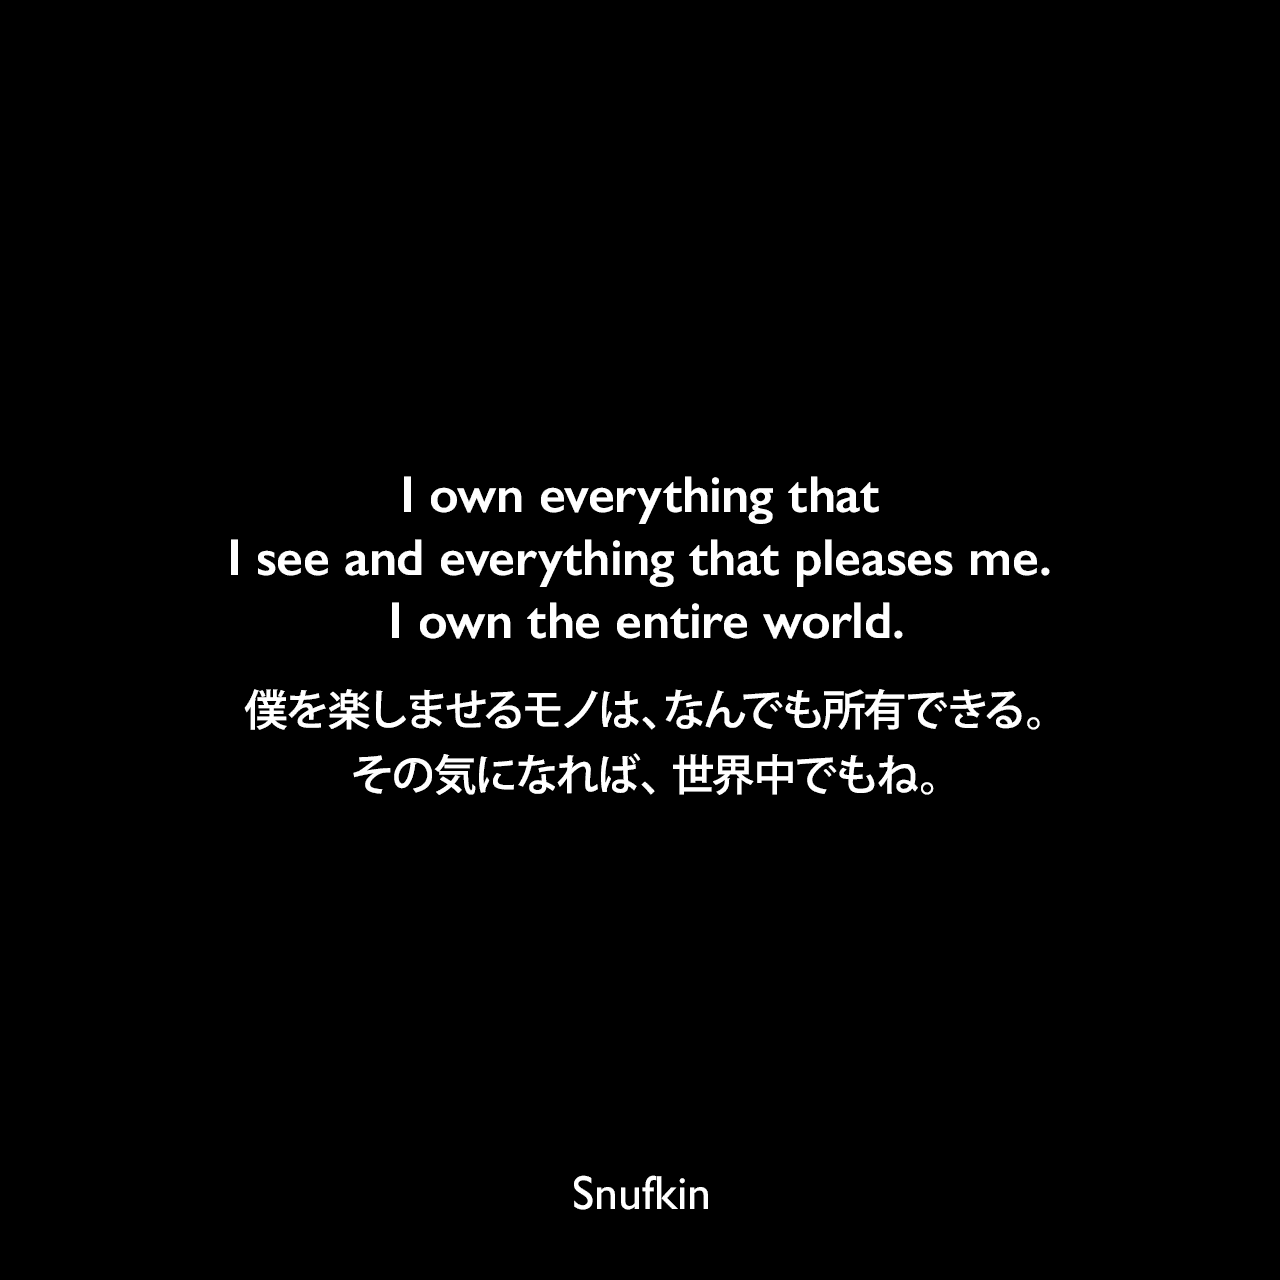 I own everything that I see and everything that pleases me. I own the entire world.僕を楽しませるモノは、なんでも所有できる。その気になれば、 世界中でもね。Snufkin